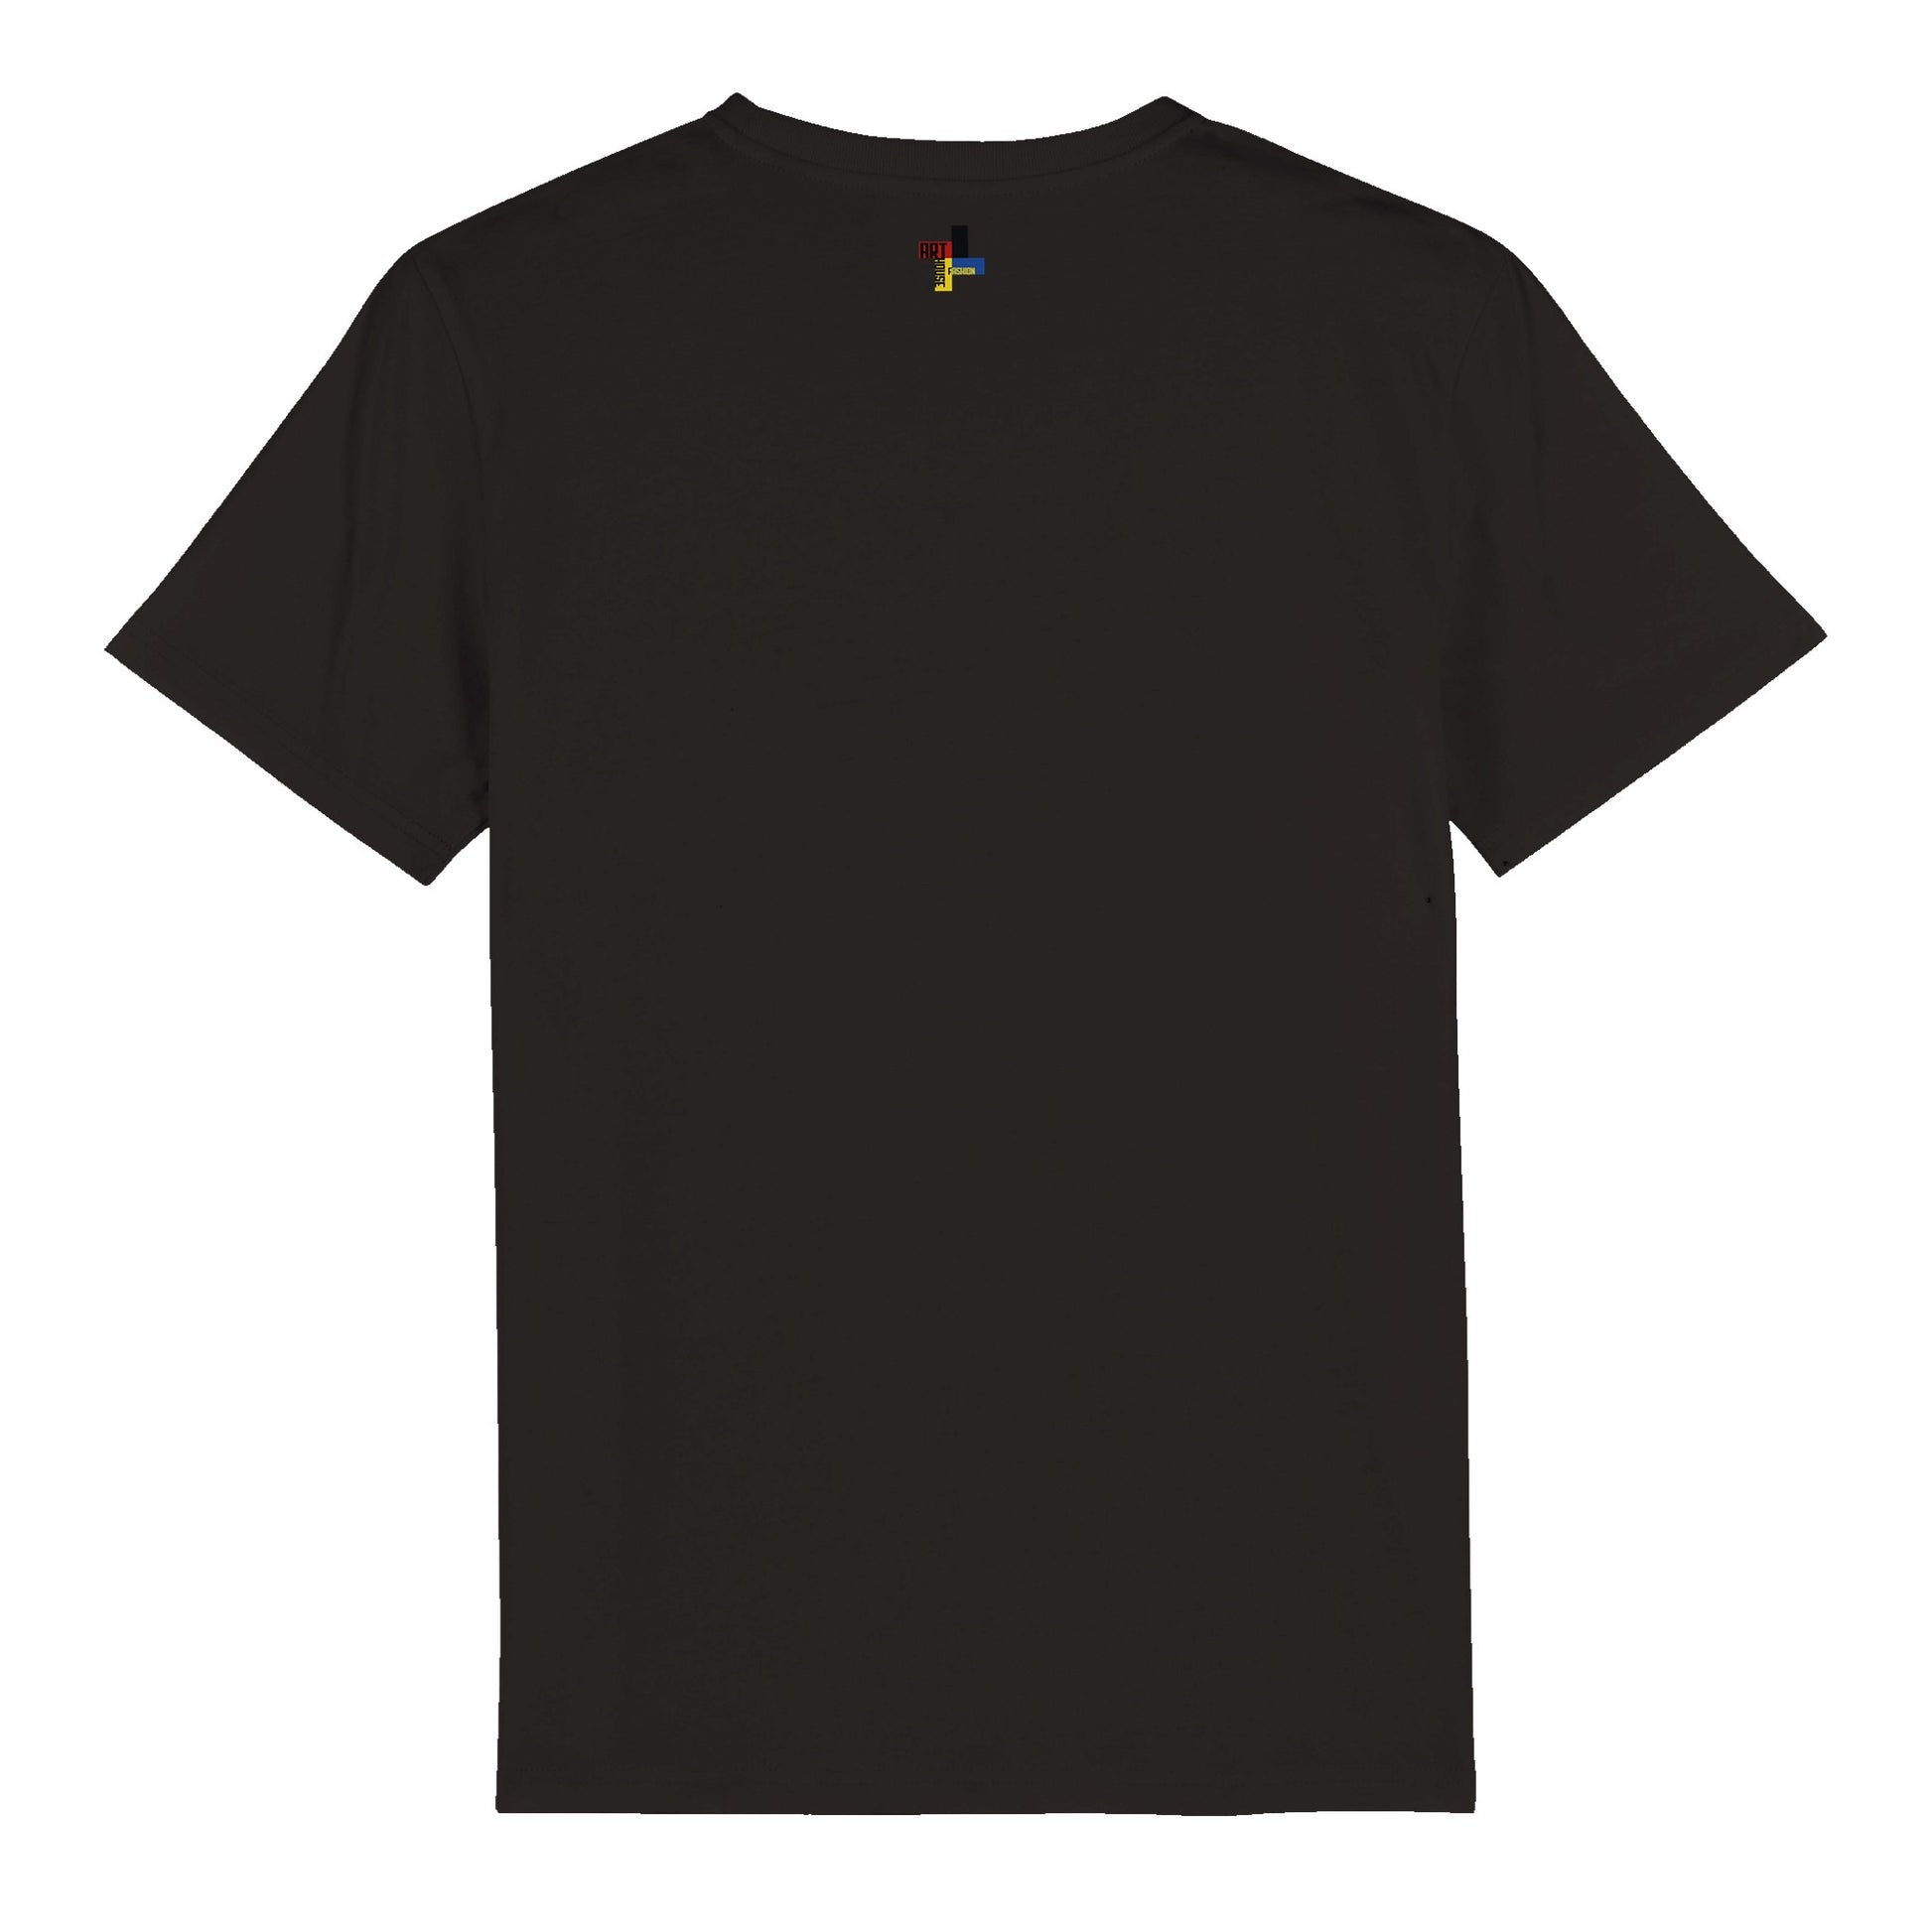 a black t - shirt with a rainbow logo on the chest